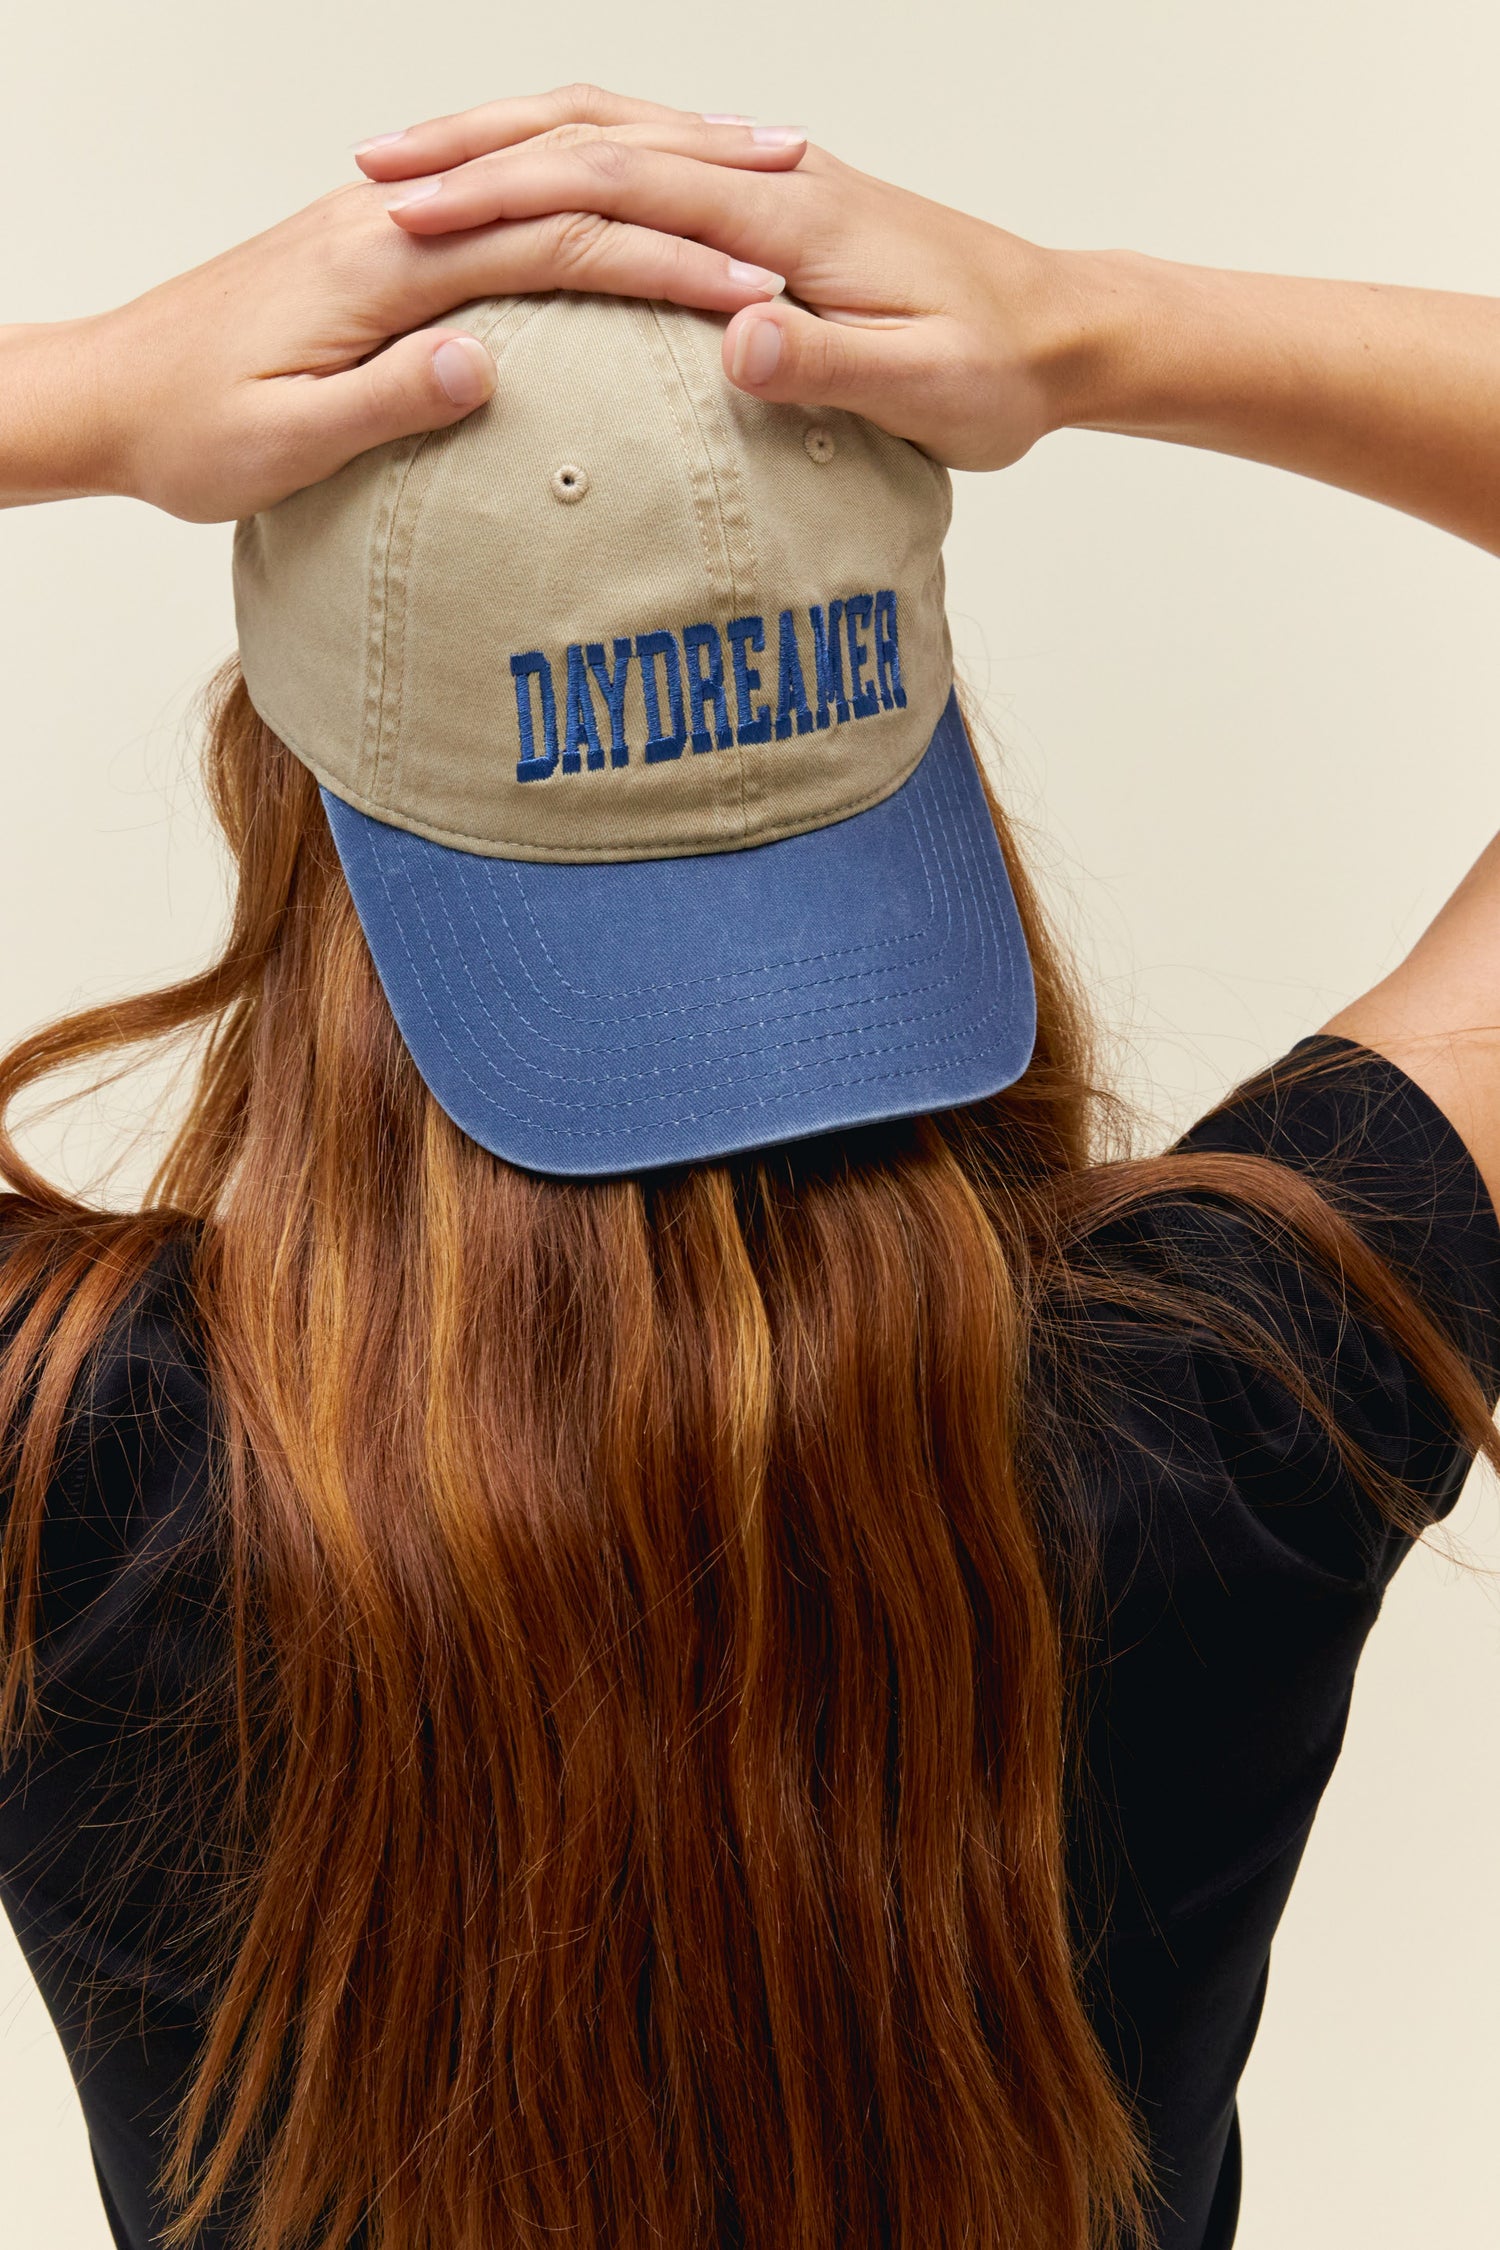 Model wearing a two-tone dad hat in blue and tan with collegiate-style 'Daydreamer' logo embroidery on the front.